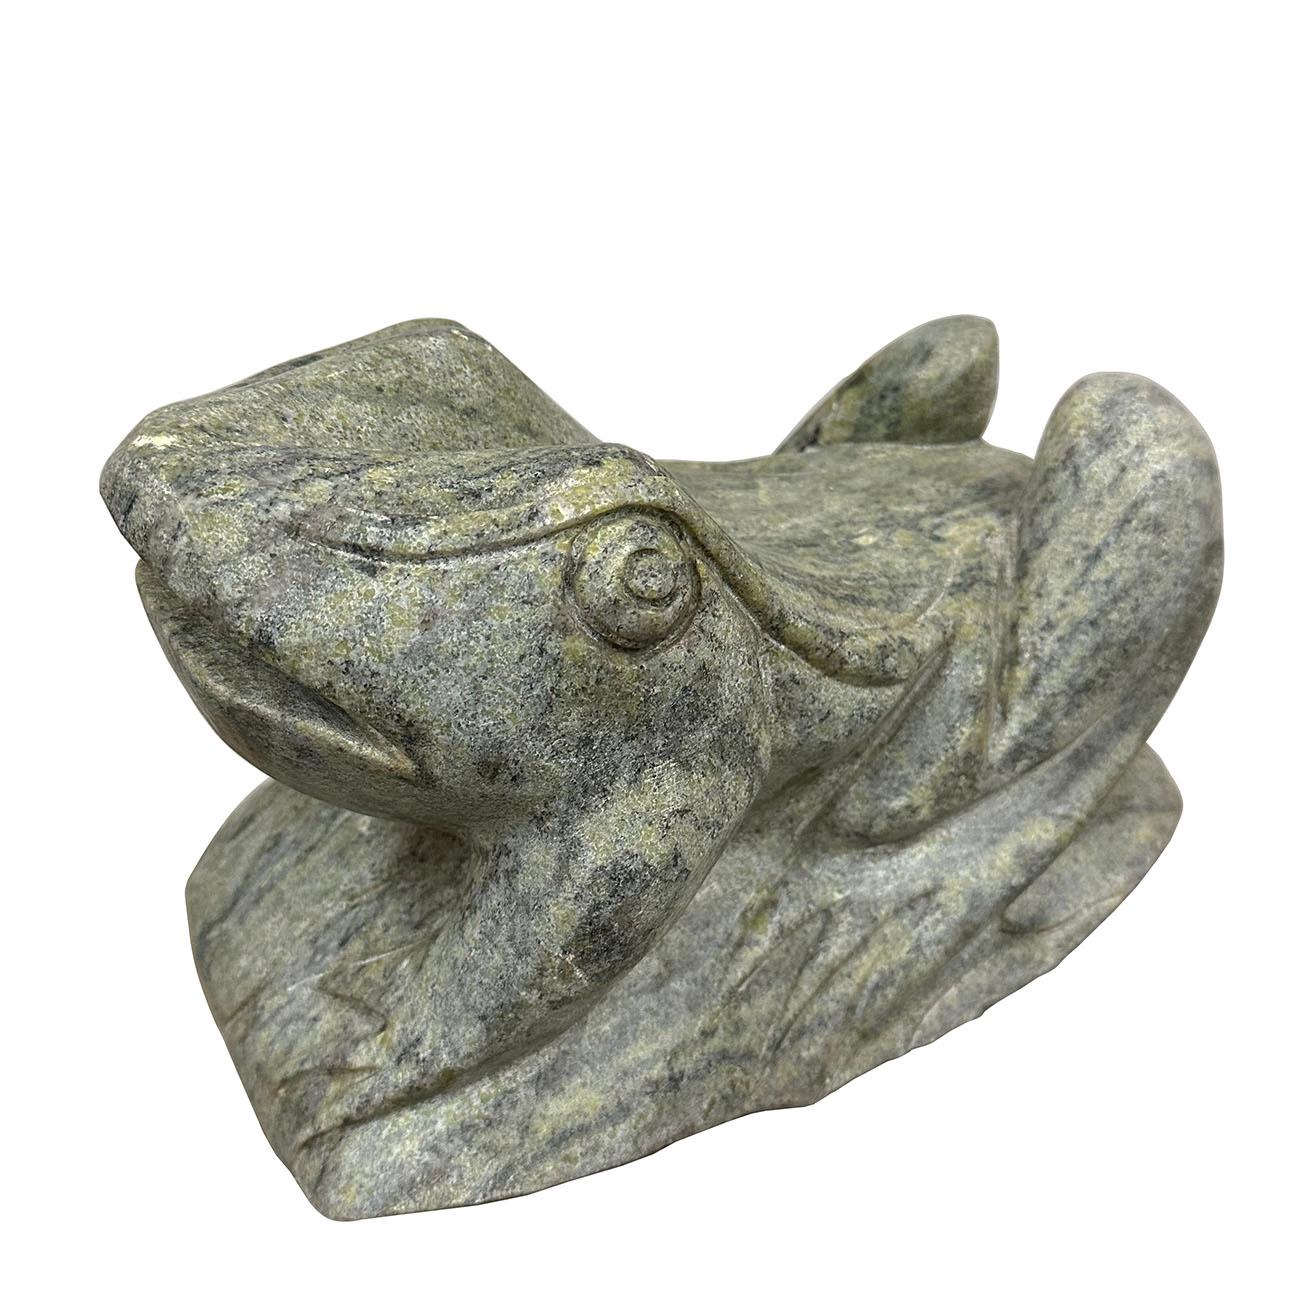 This vintage Chinese stone frog sculpture is hand Craft with exquisite detail which was very common in stone sculptures. This sculpture is handcrafted from Mid-20th century using solid stone with very detailed hand Craft works which reflects the